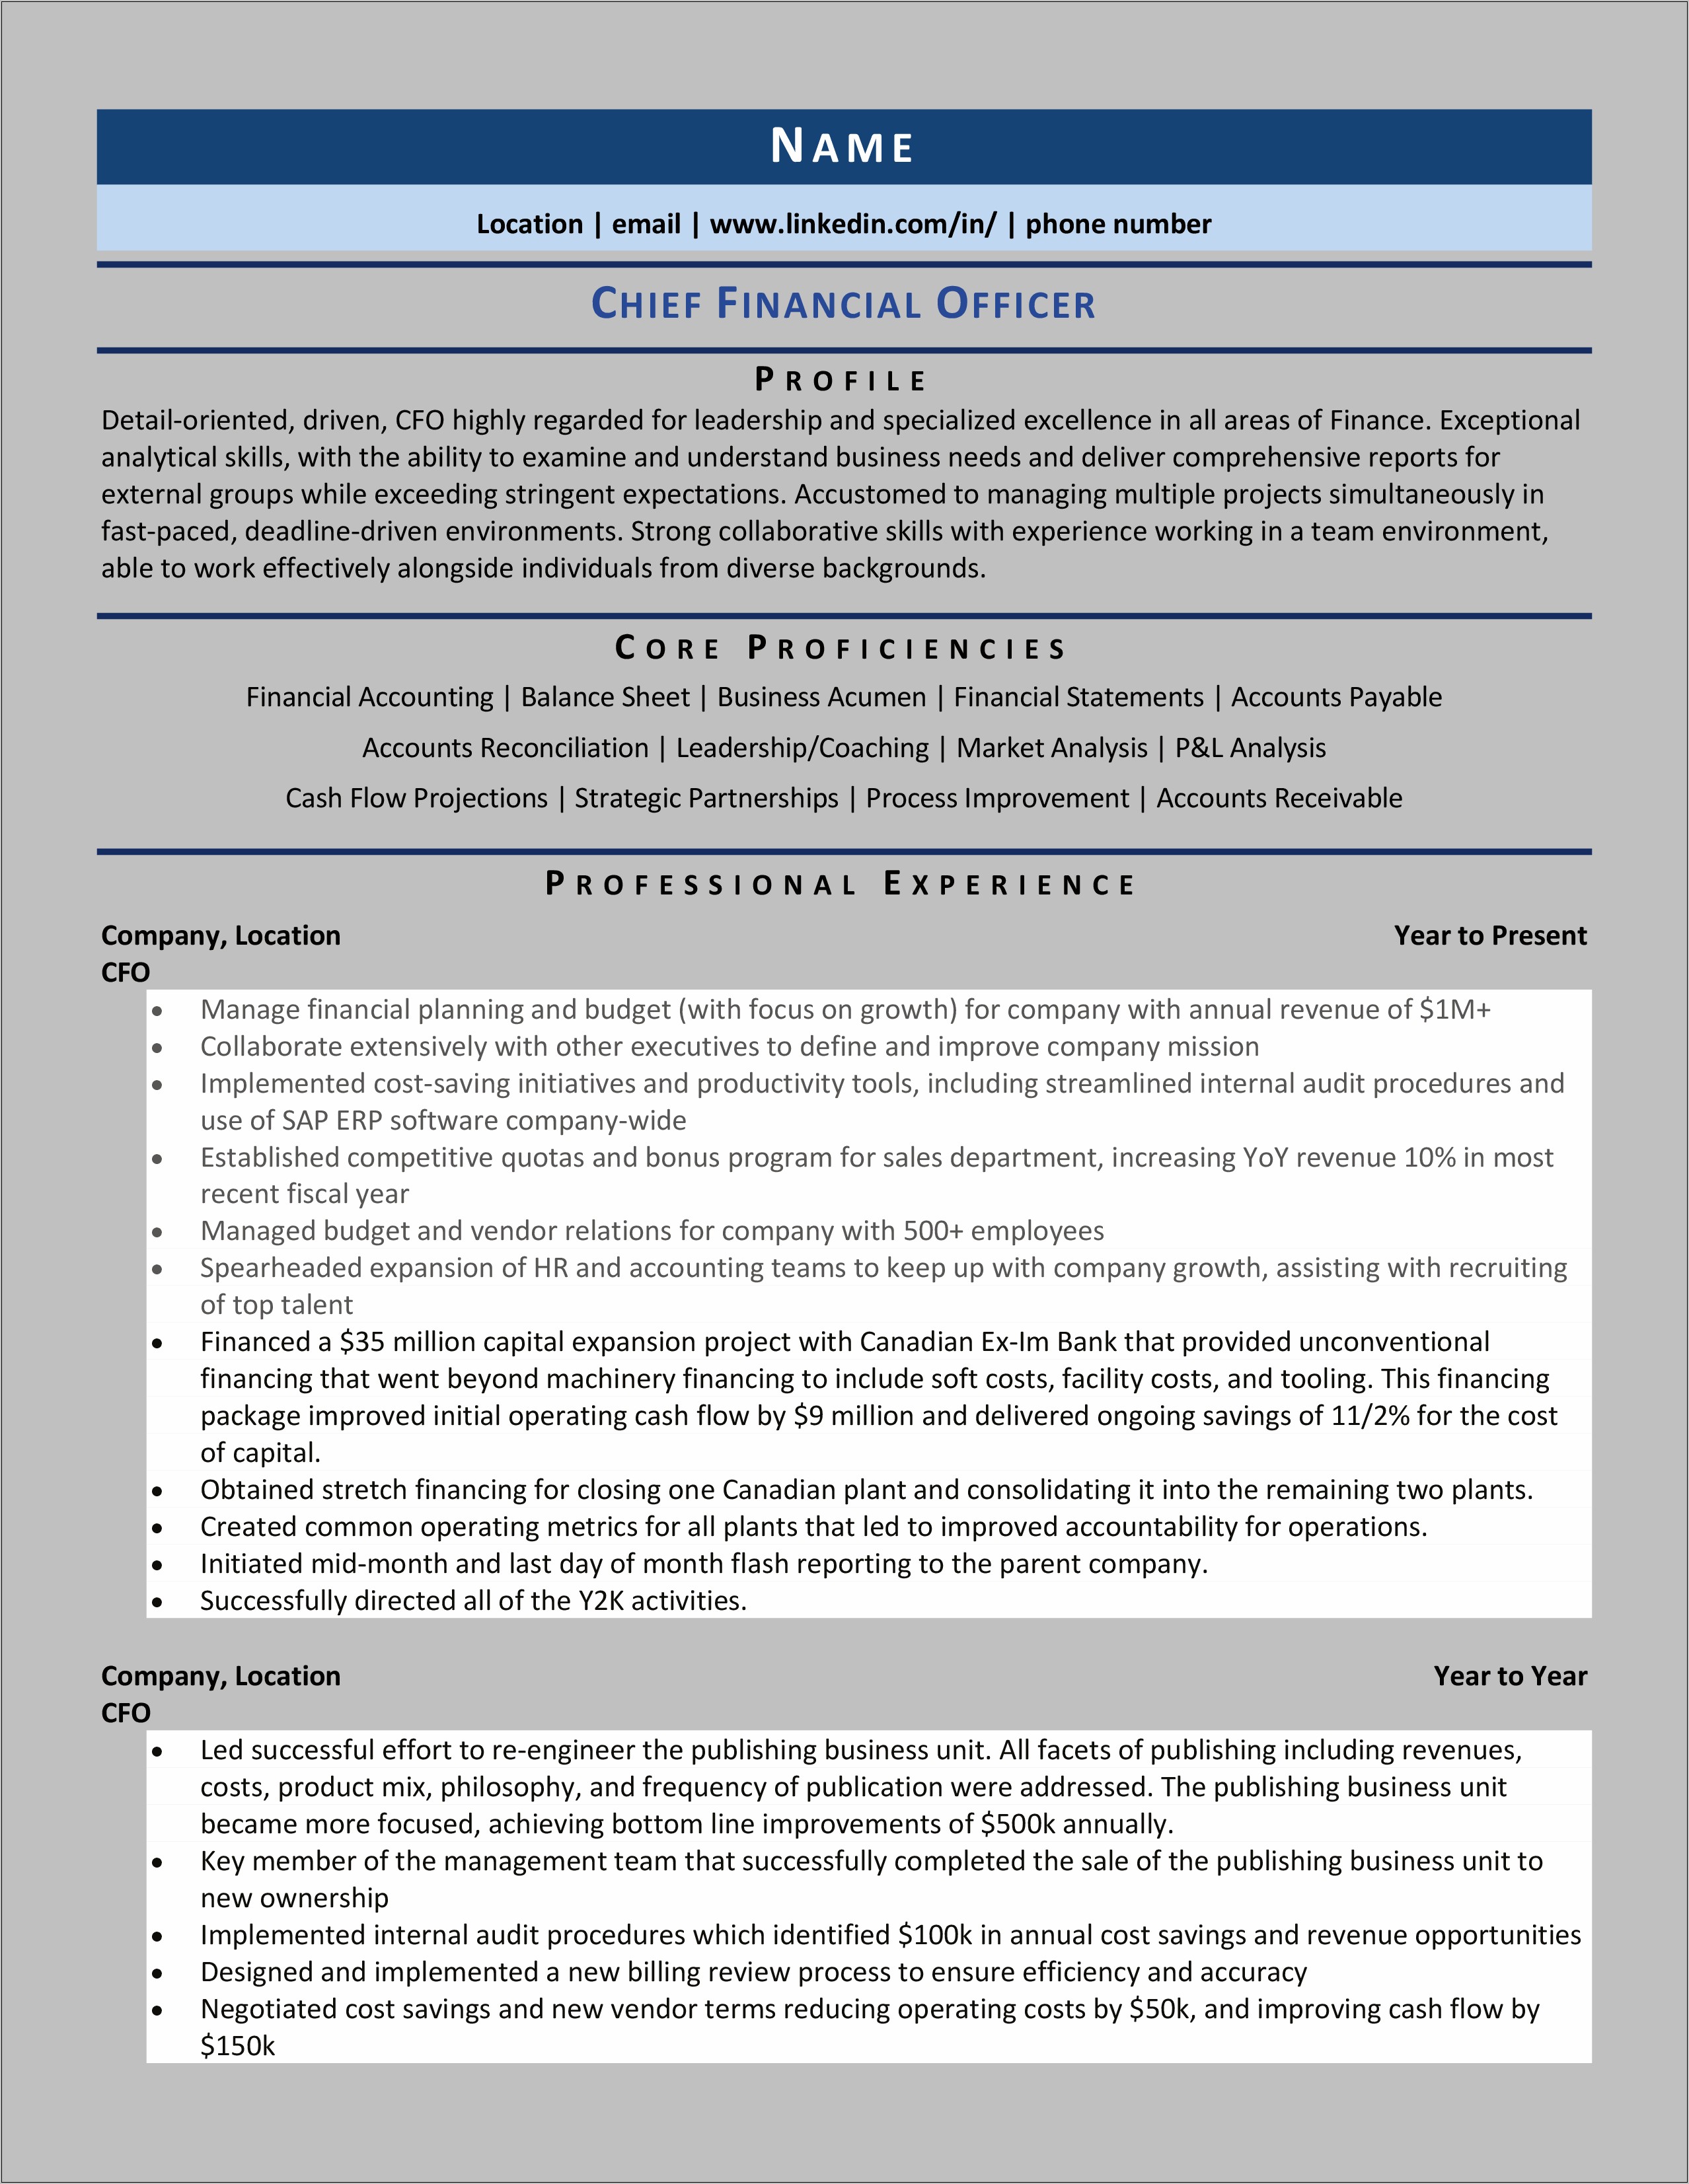 Professional Summary Resume Example For Financial Officer